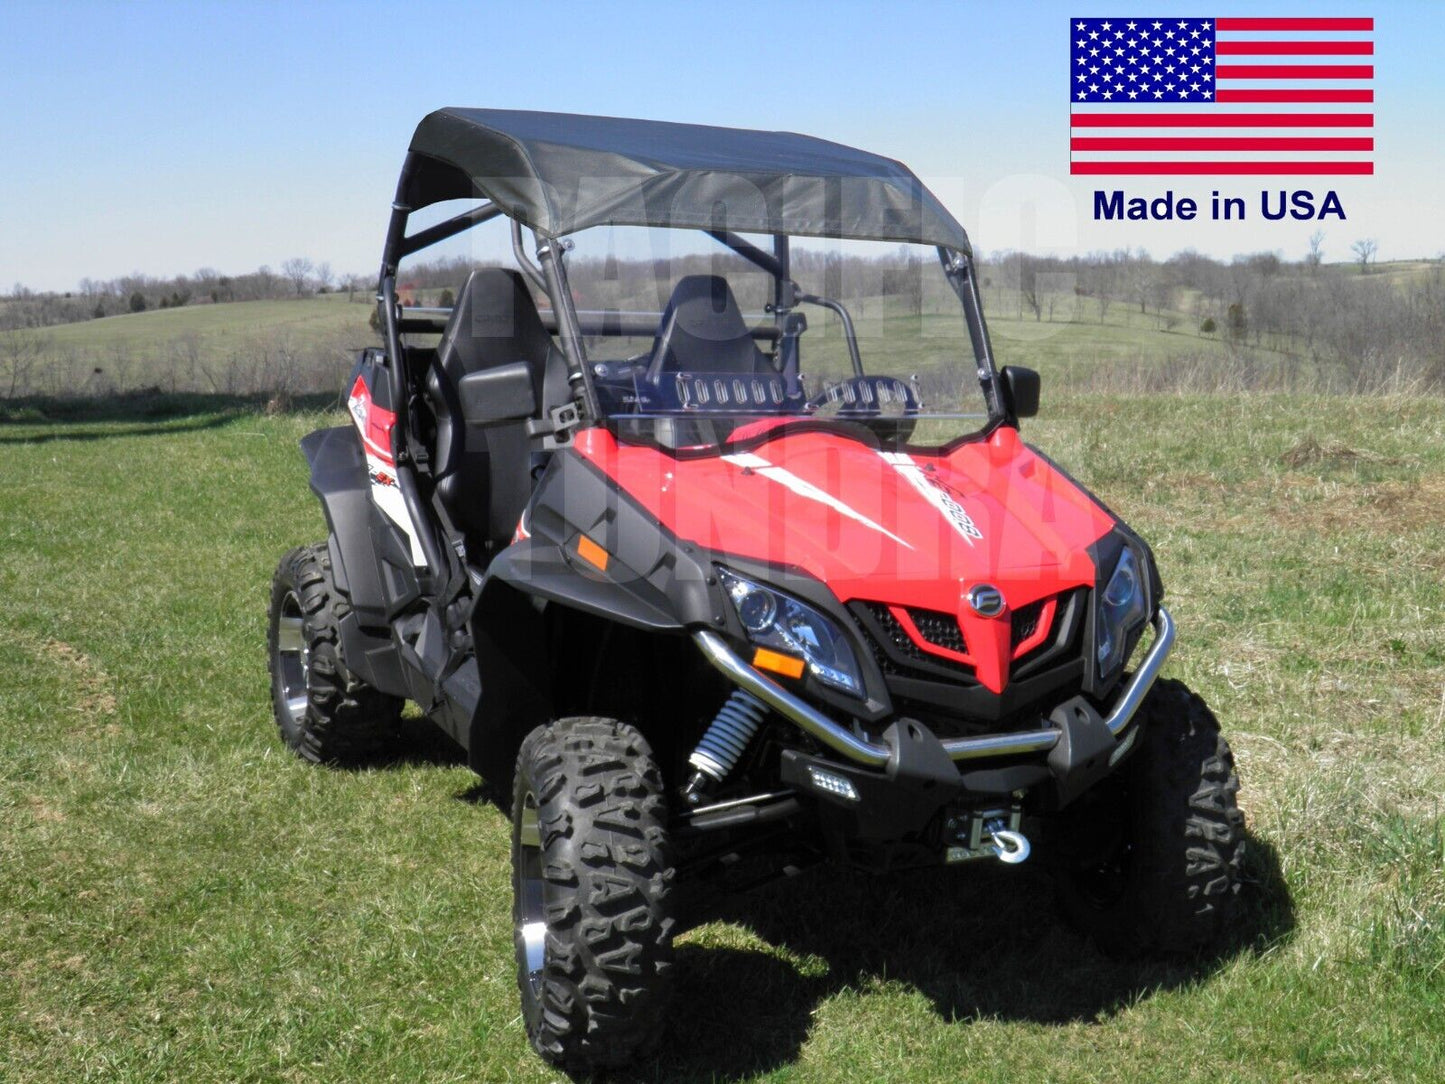 ROOF & HARD WINDSHIELD Combo for CFMoto ZForce 500/800/1000 - Soft Top